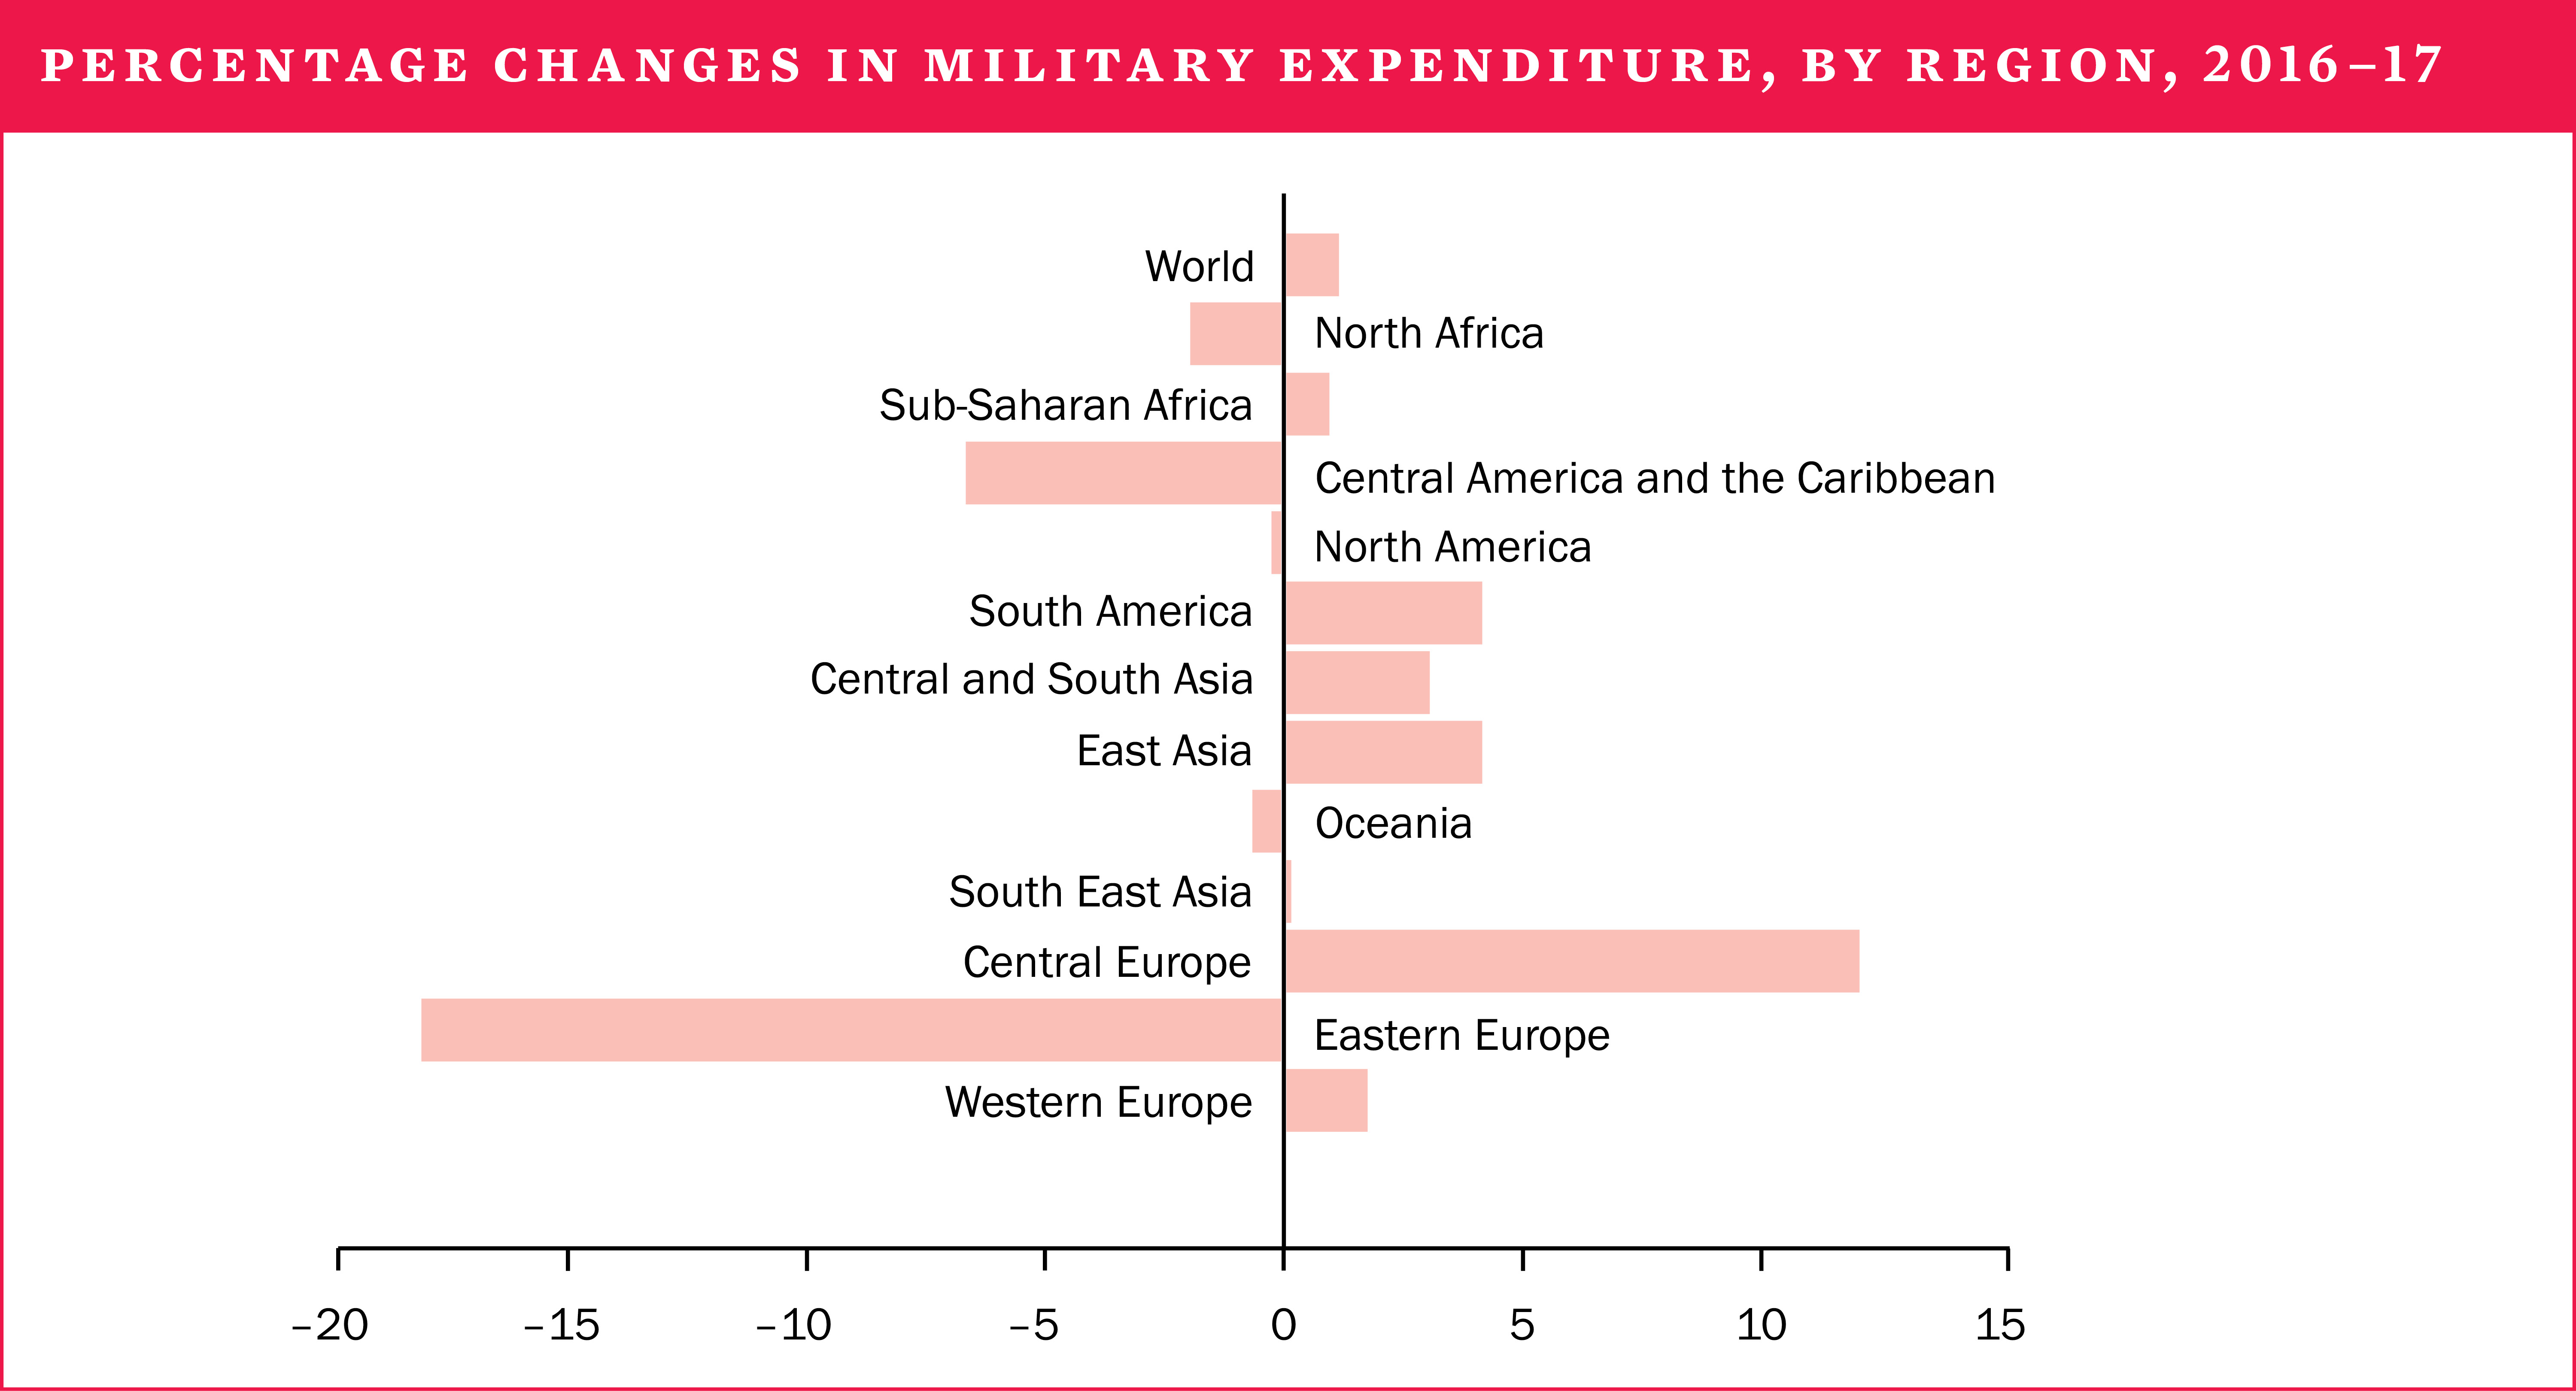 Percentage changes in military expenditure, by region, 2016-17